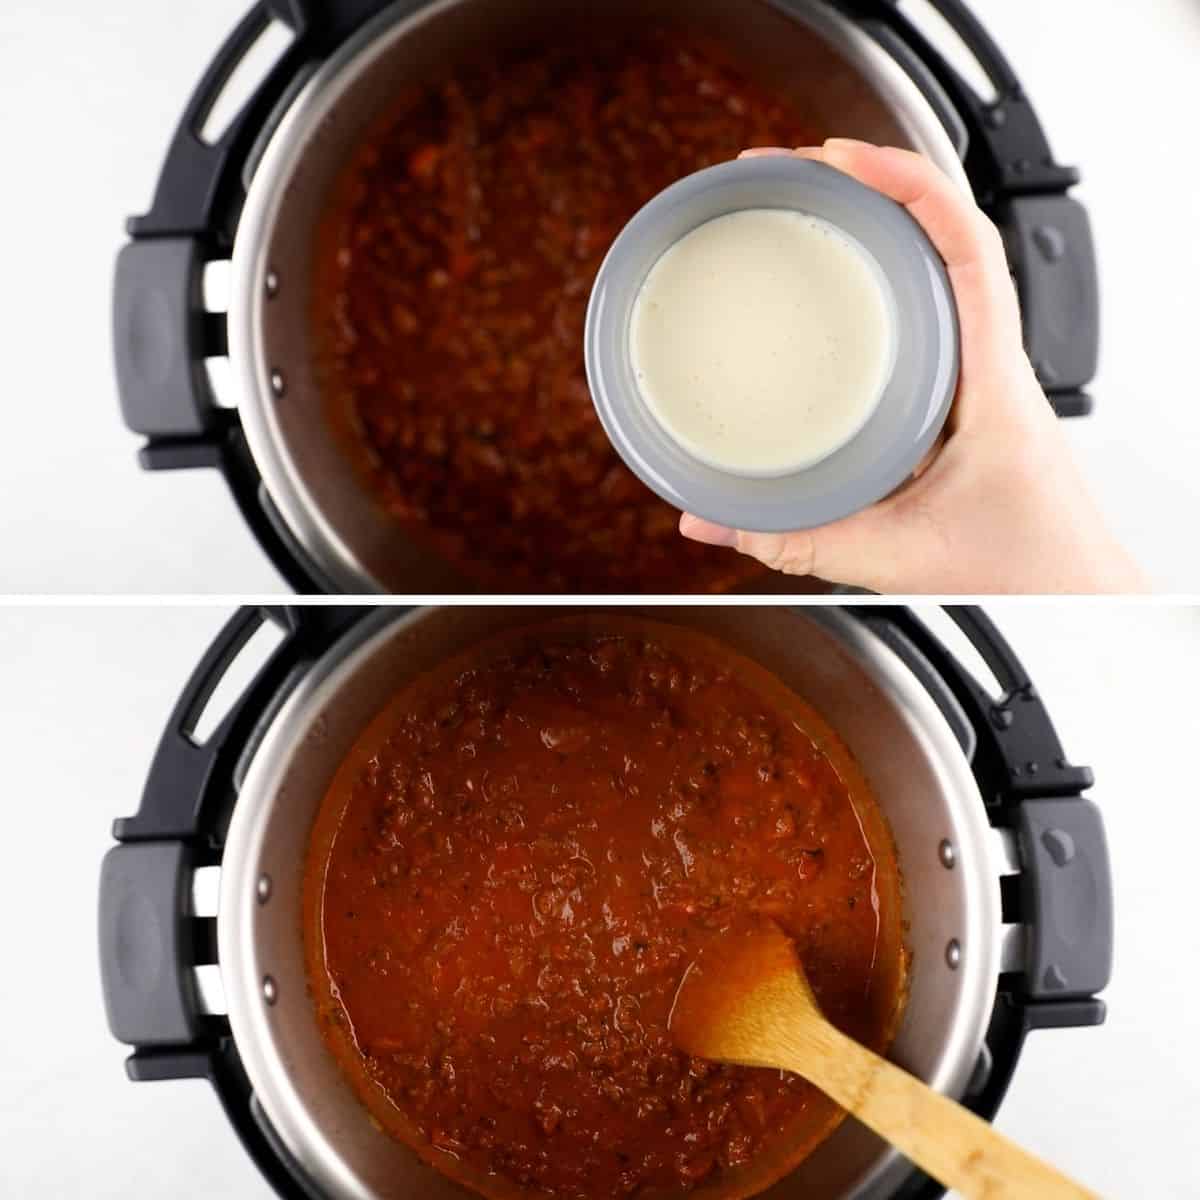 Process photos of adding heavy cream to the meat sauce.